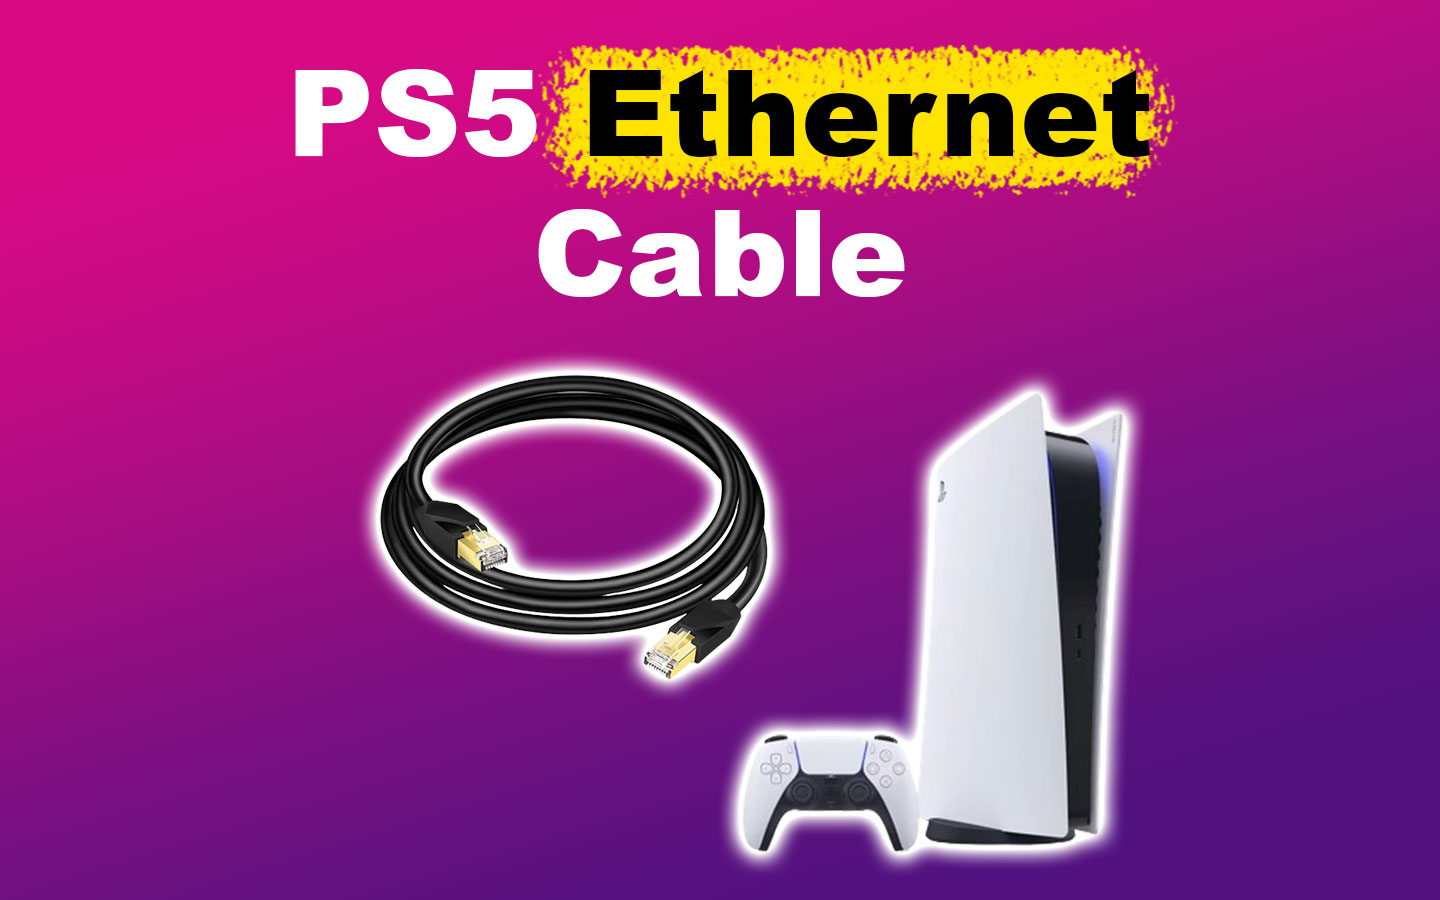 PS5 Ethernet Cable